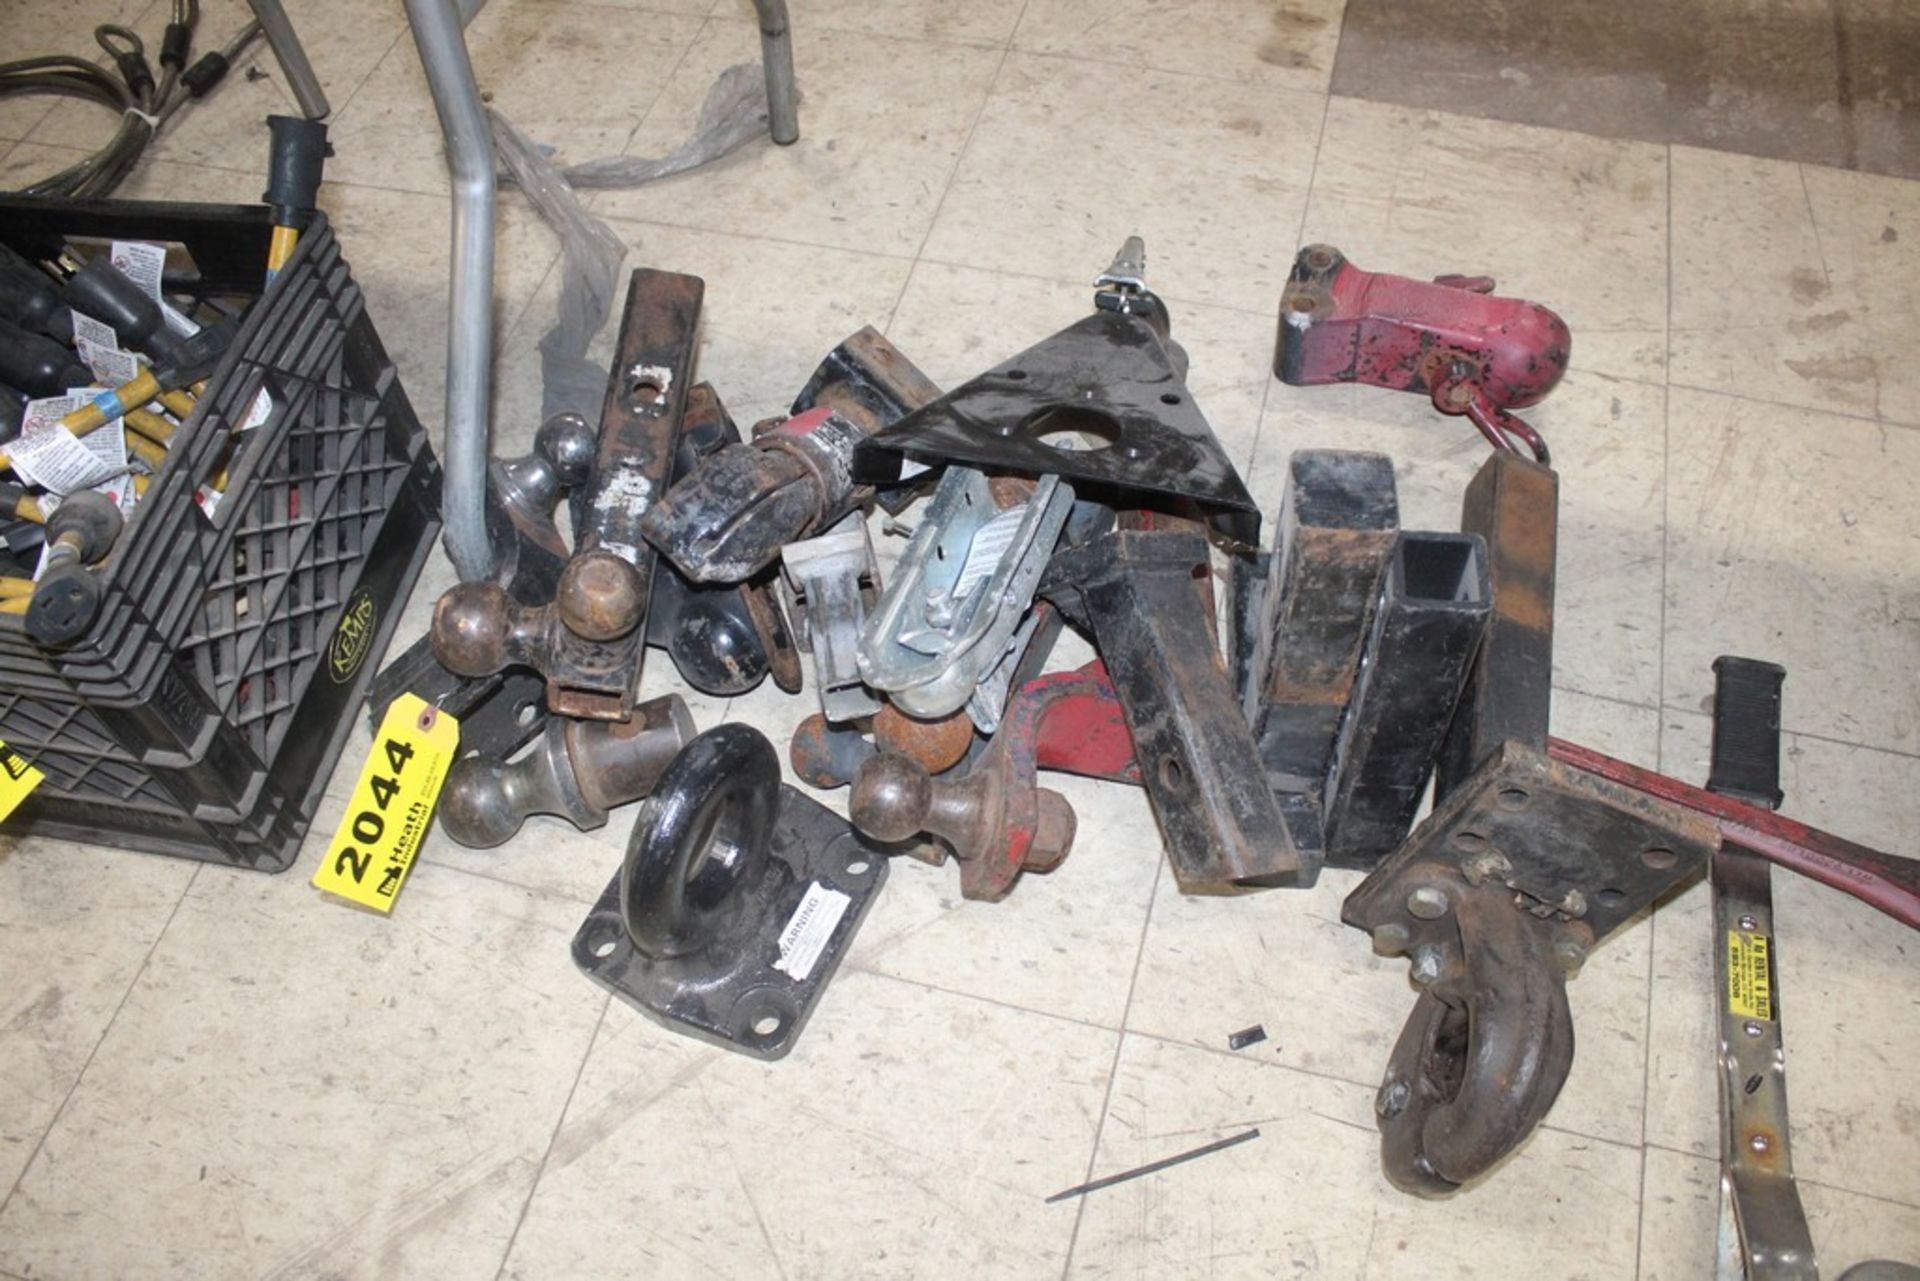 ASSORTED TRAILER HITCHES AND BALLS ON FLOOR